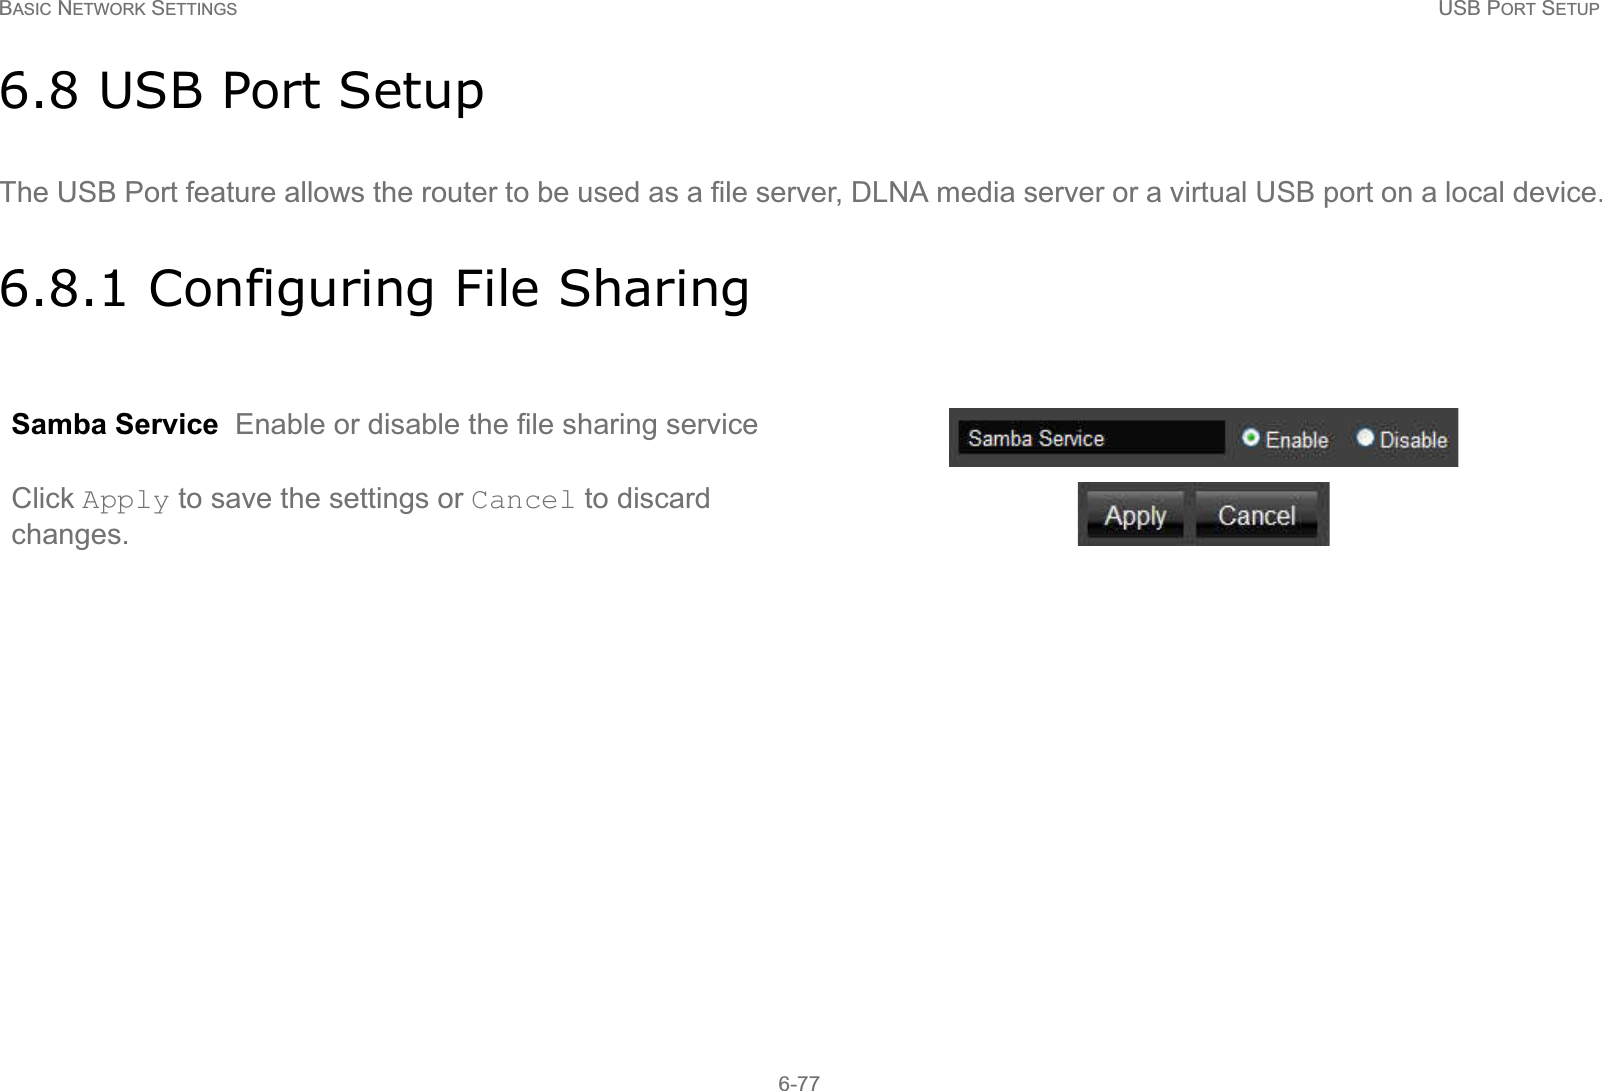 BASIC NETWORK SETTINGS USB PORT SETUP6-776.8 USB Port SetupThe USB Port feature allows the router to be used as a file server, DLNA media server or a virtual USB port on a local device.6.8.1 Configuring File SharingSamba Service  Enable or disable the file sharing serviceClick Apply to save the settings or Cancel to discard changes.